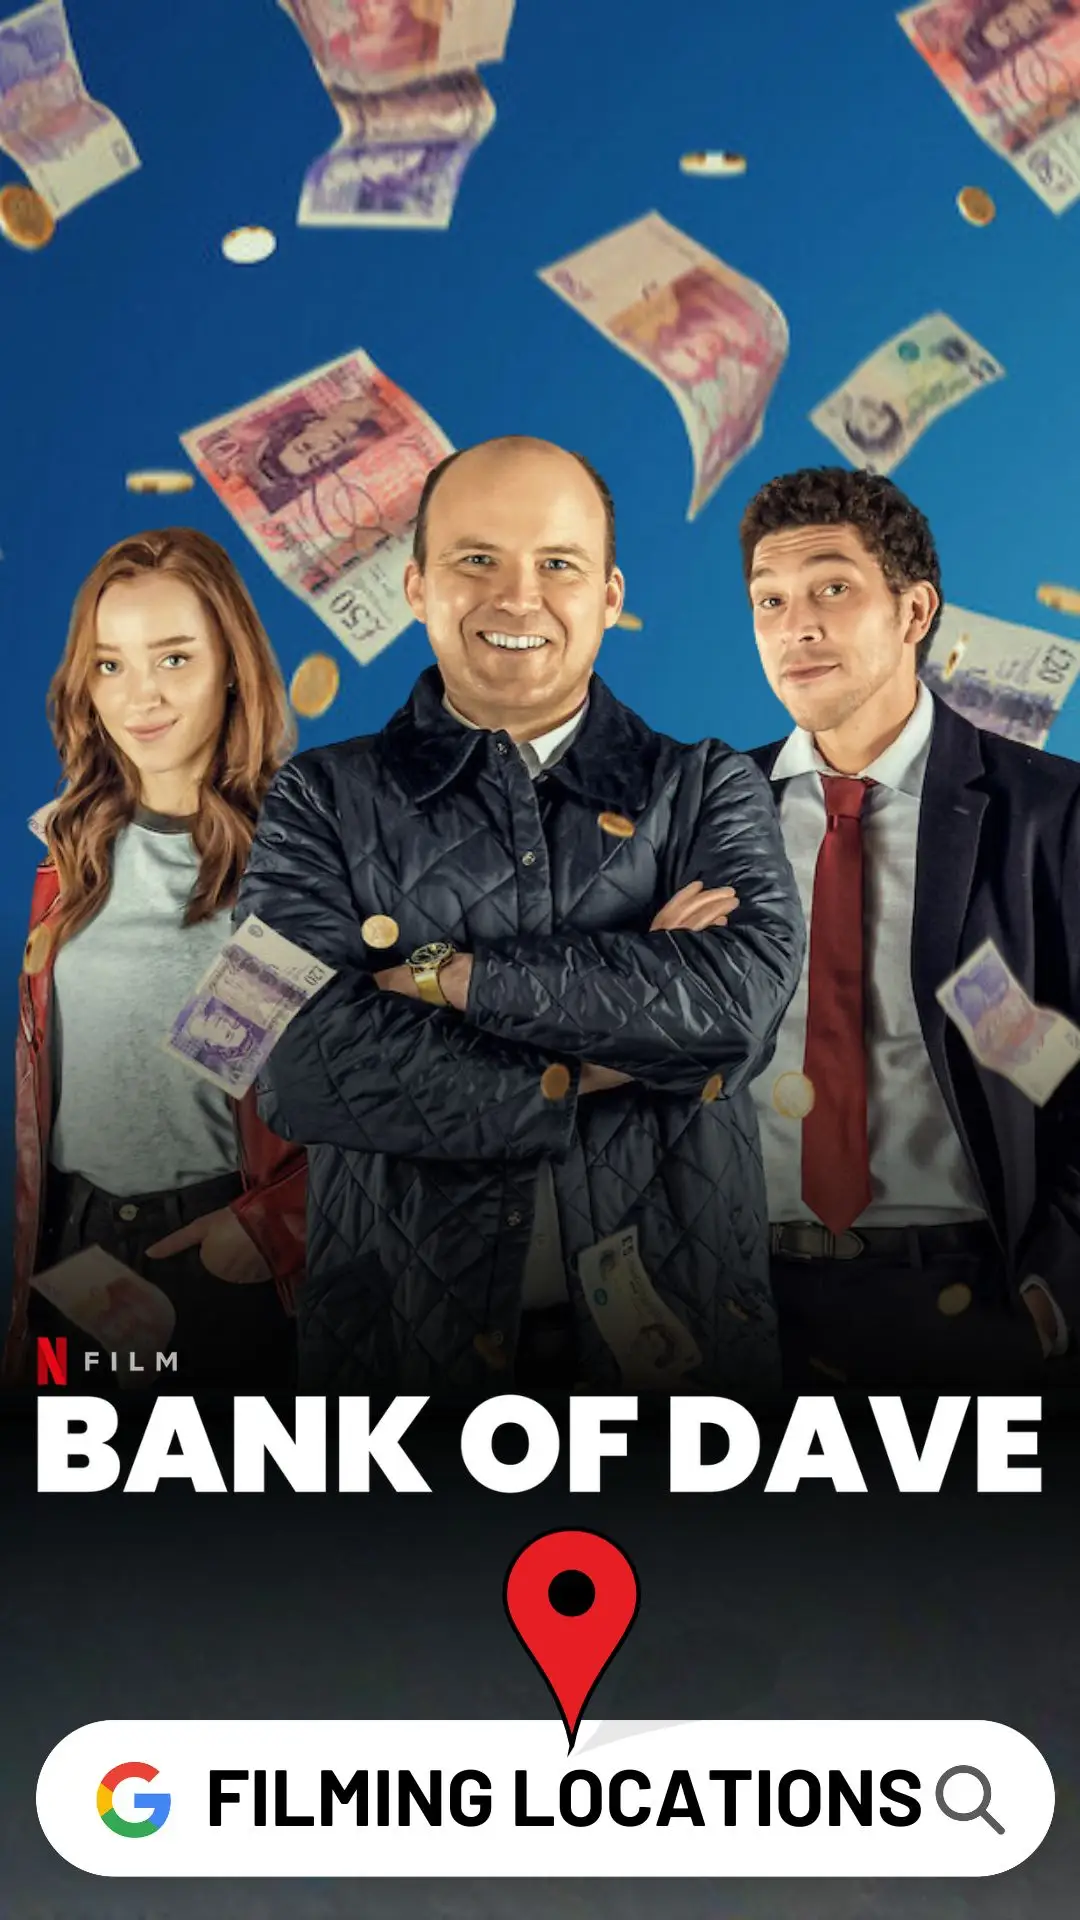 Bank of Dave Filming Locations